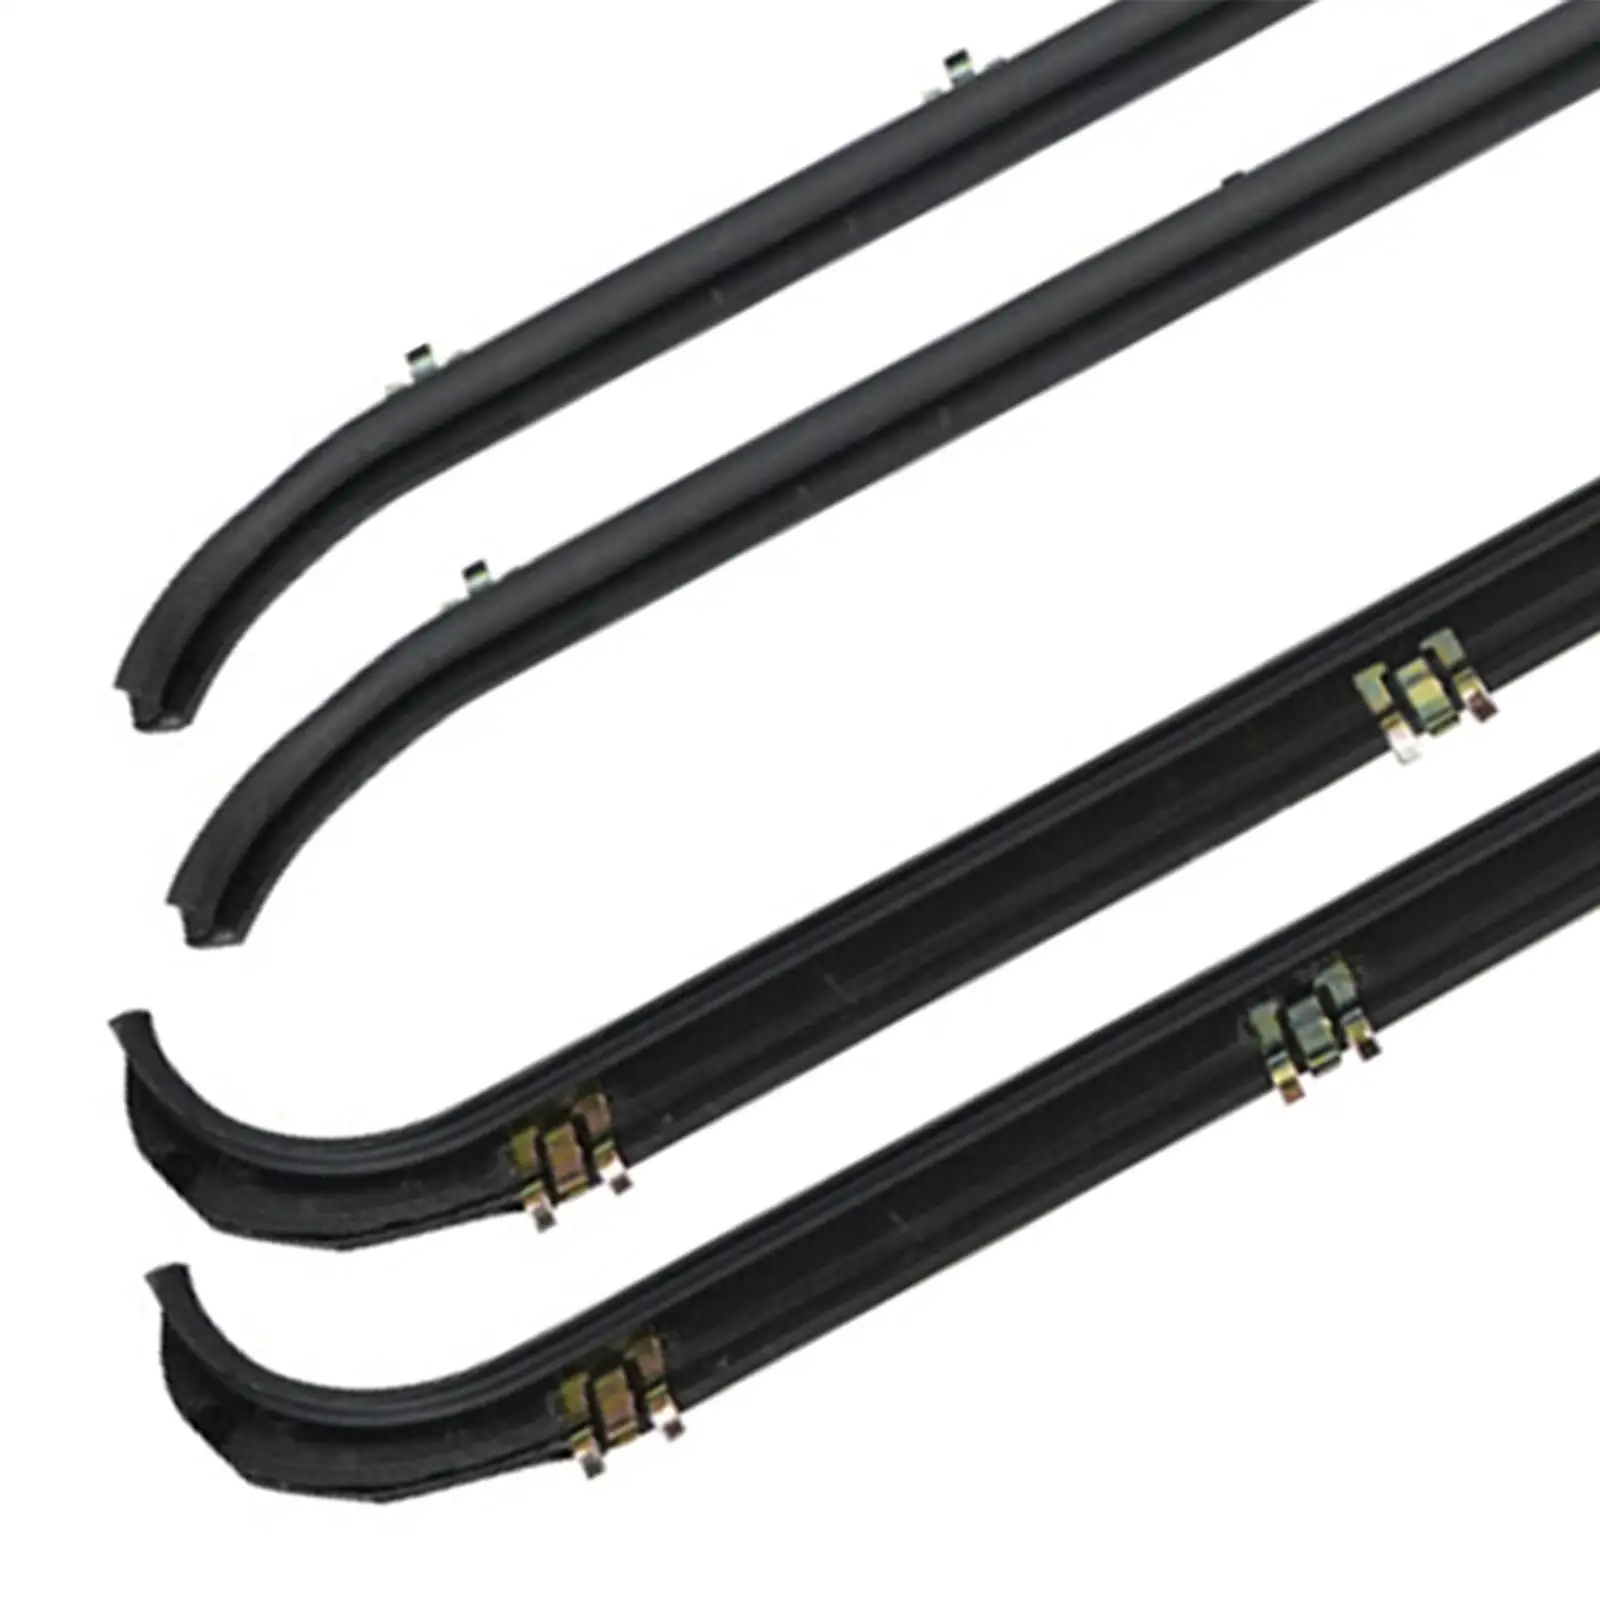 4x Weatherstrip Window Seal Fo1390147 Easy to Install Door Window Weatherstrip Replacements for Ford Bronco 1987 - 1997